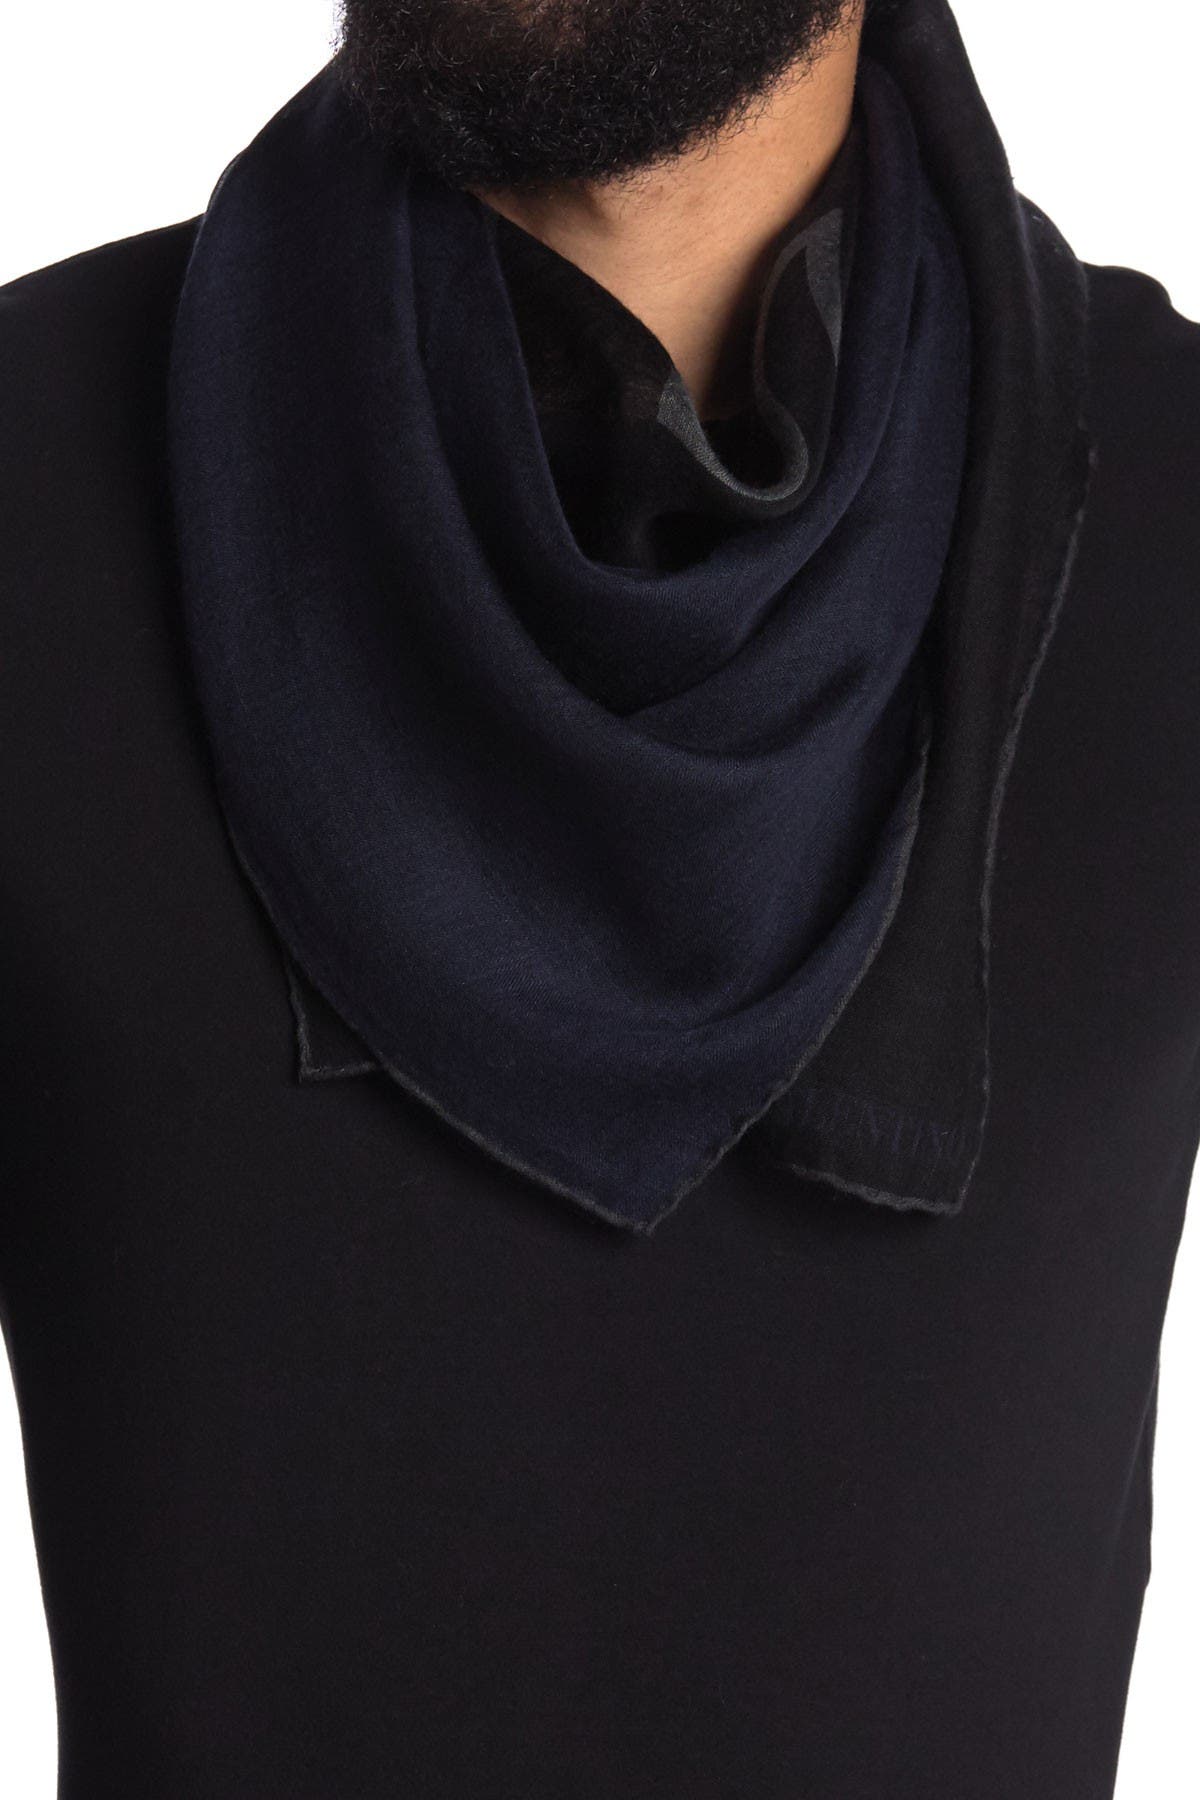 Valentino Panther Cashmere Blend Foulard Square Scarf In Navy